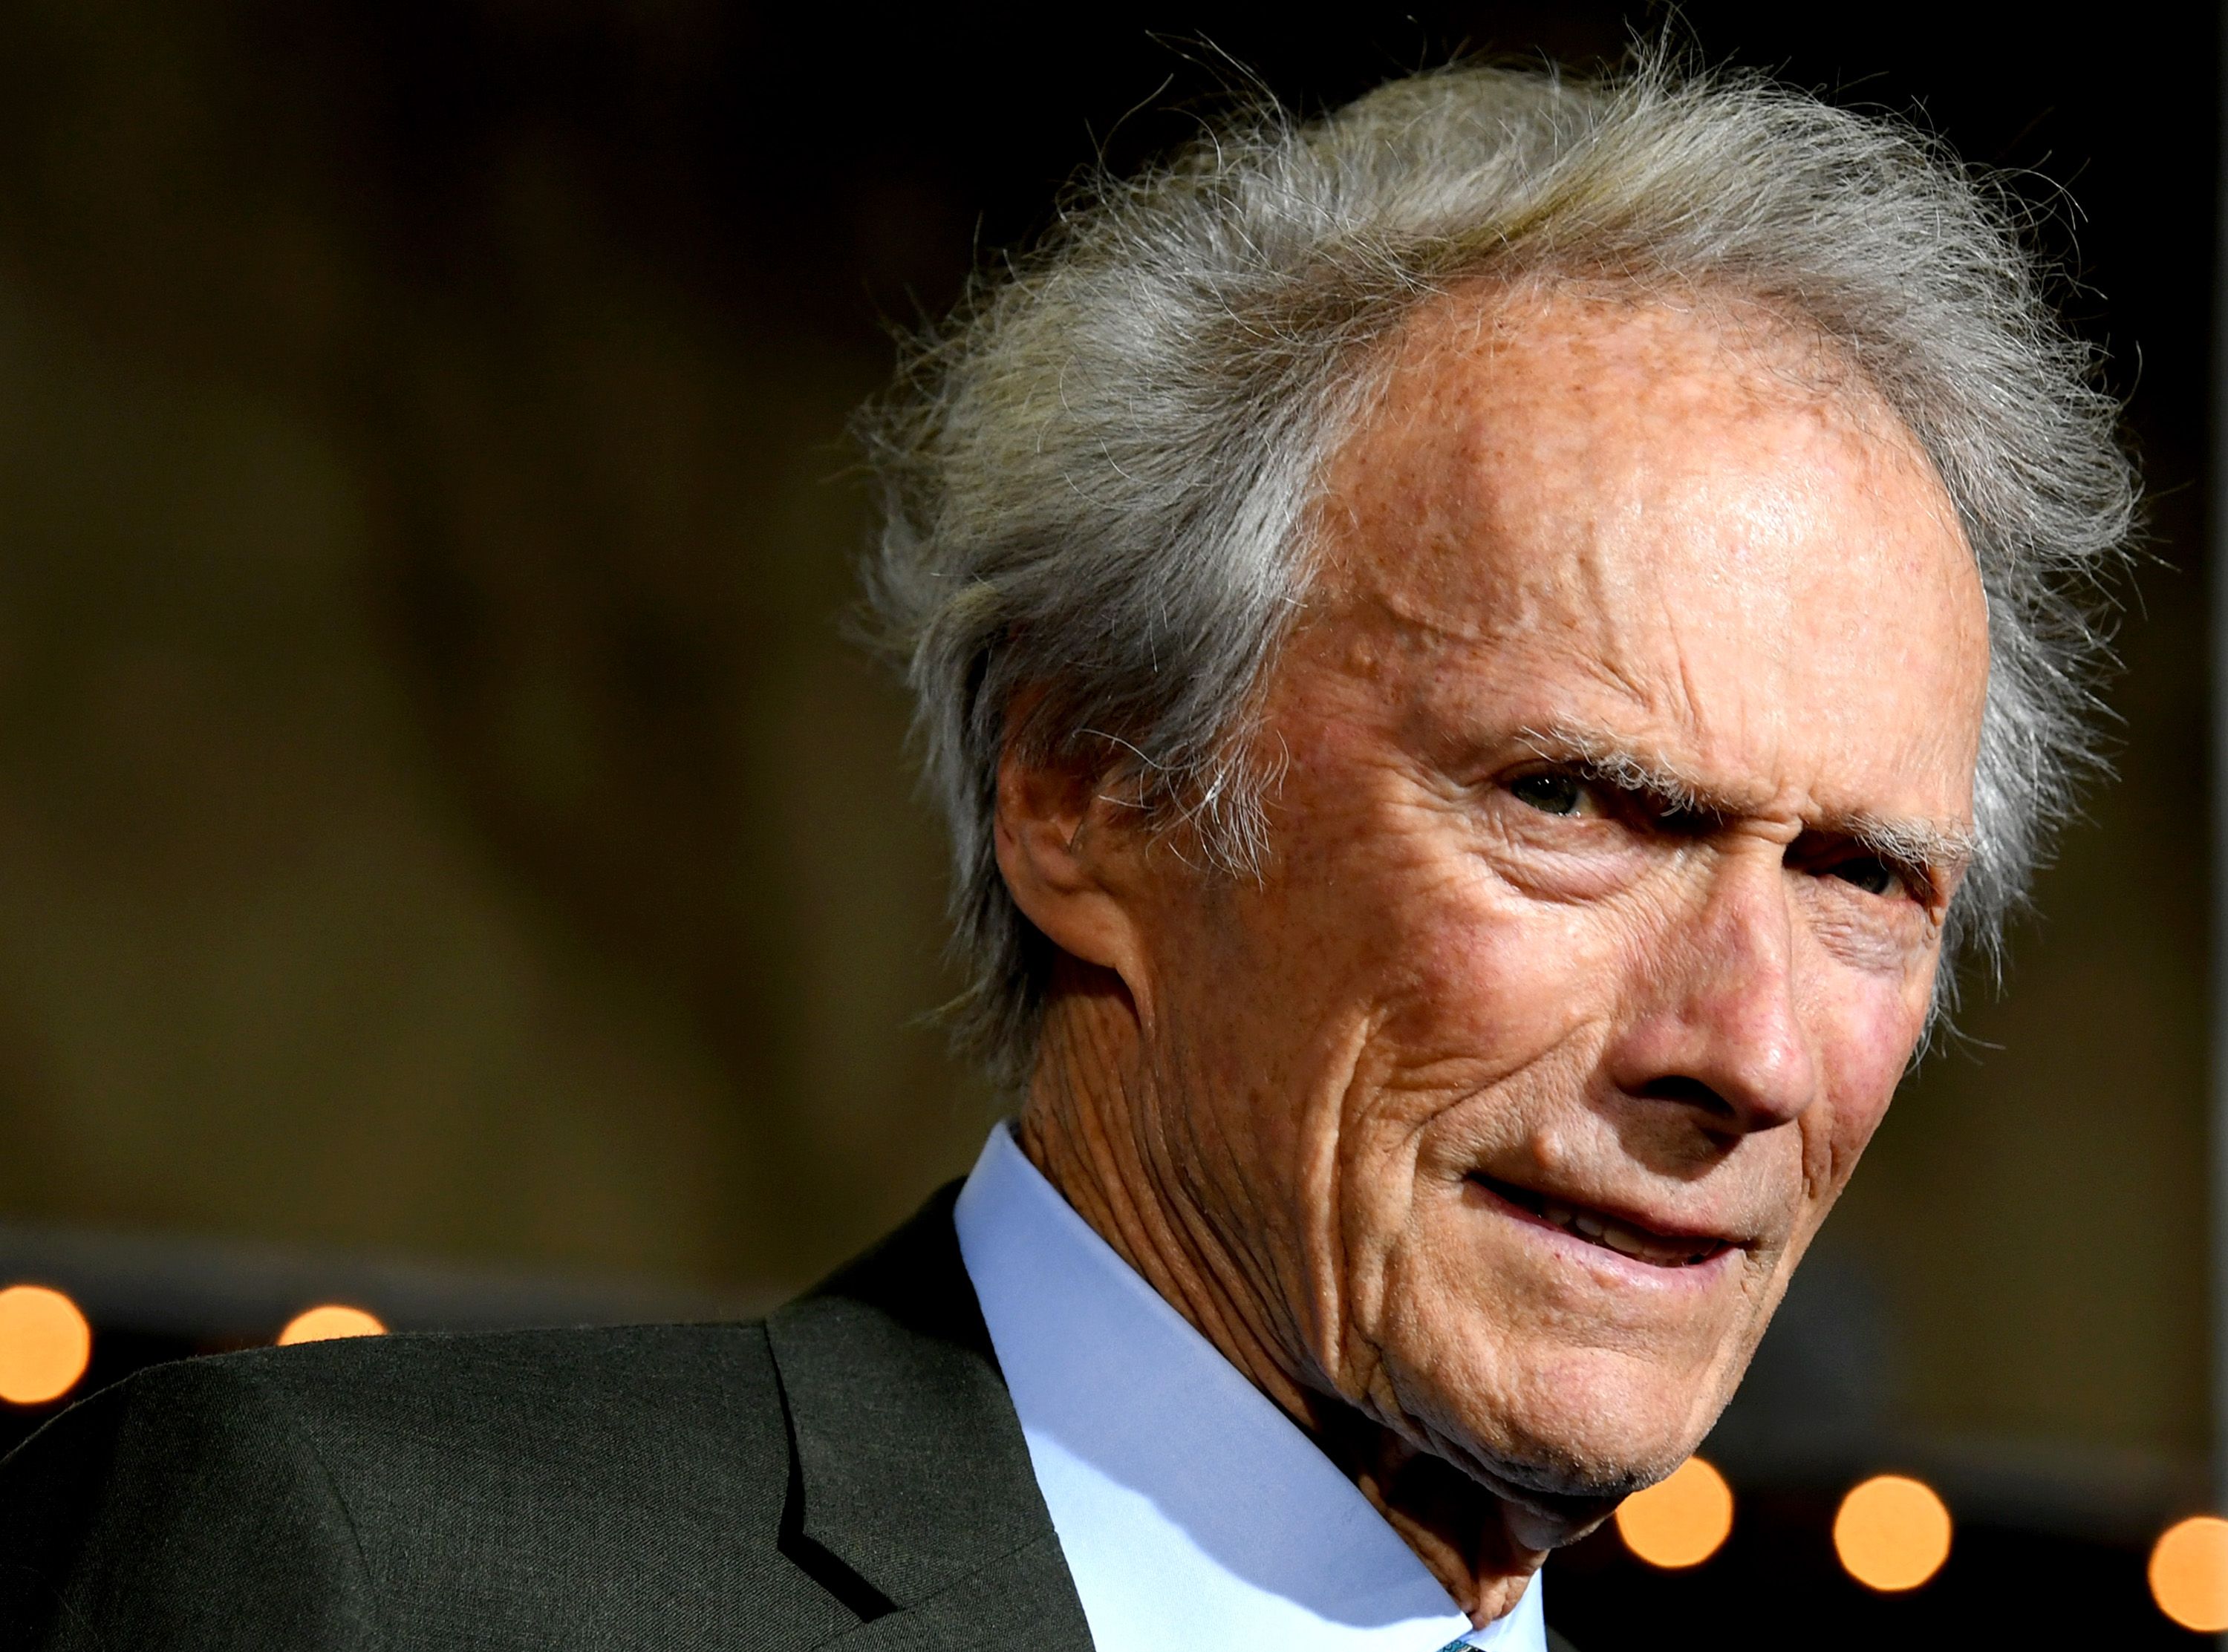 Clint Eastwood during the premiere of Warner Bros. Pictures' "The Mule" at the Village Theatre on December 10, 2018 in Los Angeles, California. | Source: Getty Images